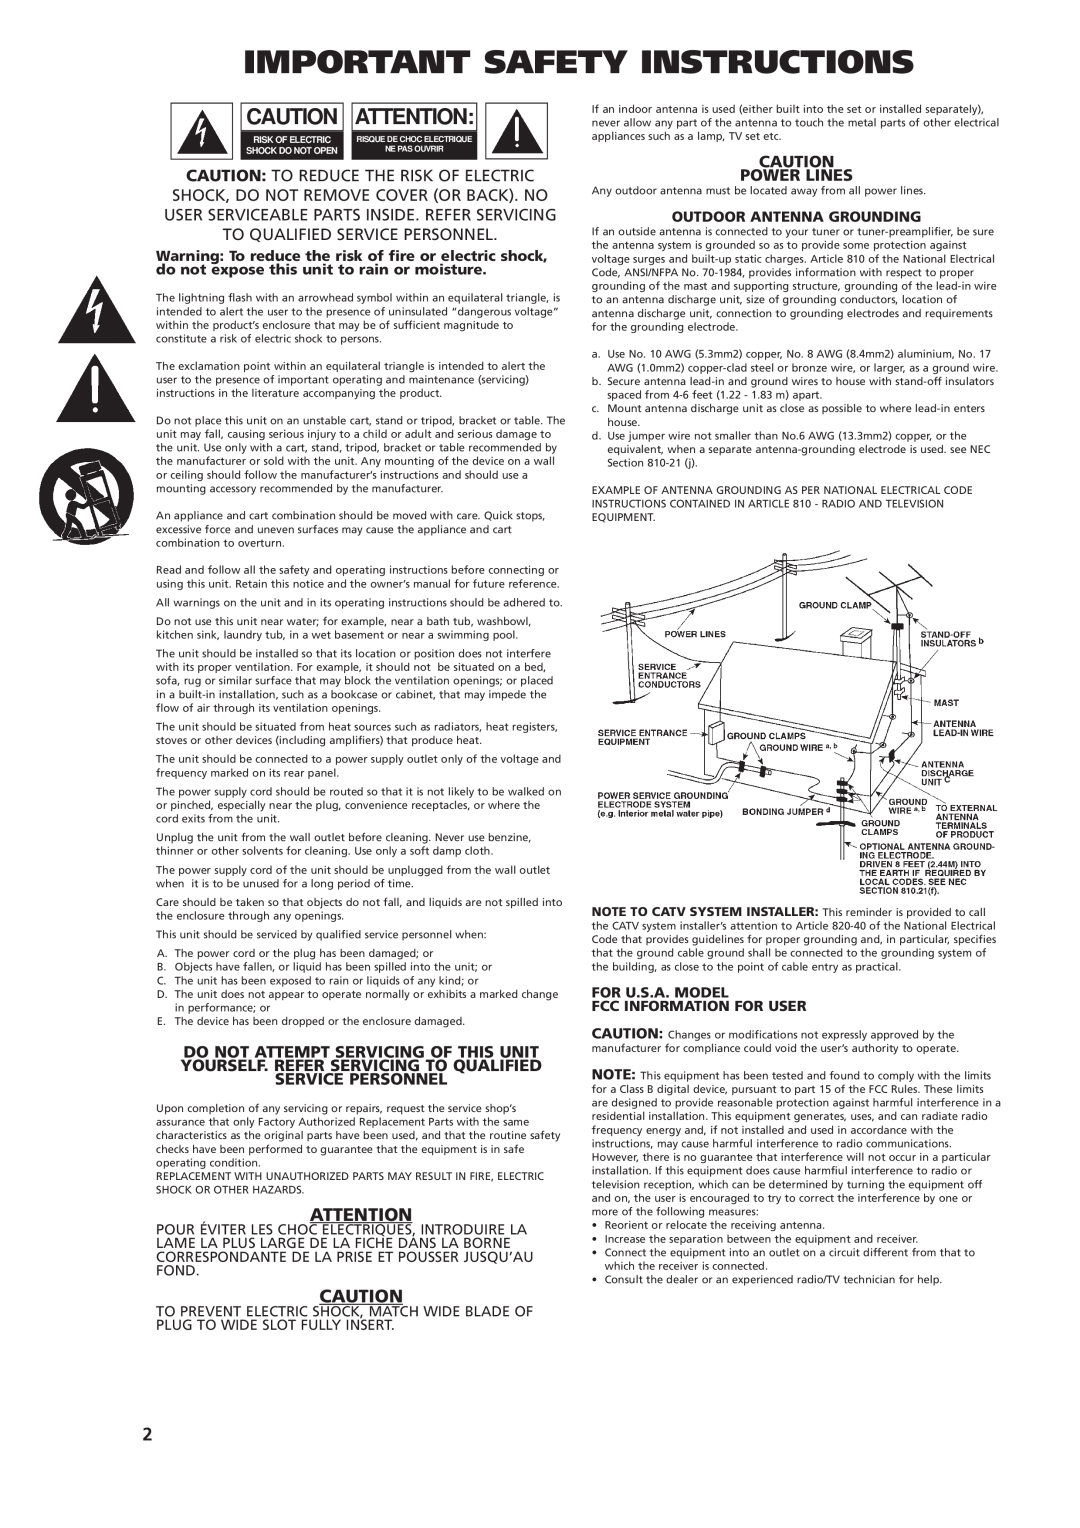 NAD T770 Important Safety Instructions, Power Lines, Outdoor Antenna Grounding, For U.S.A. Model Fcc Information For User 